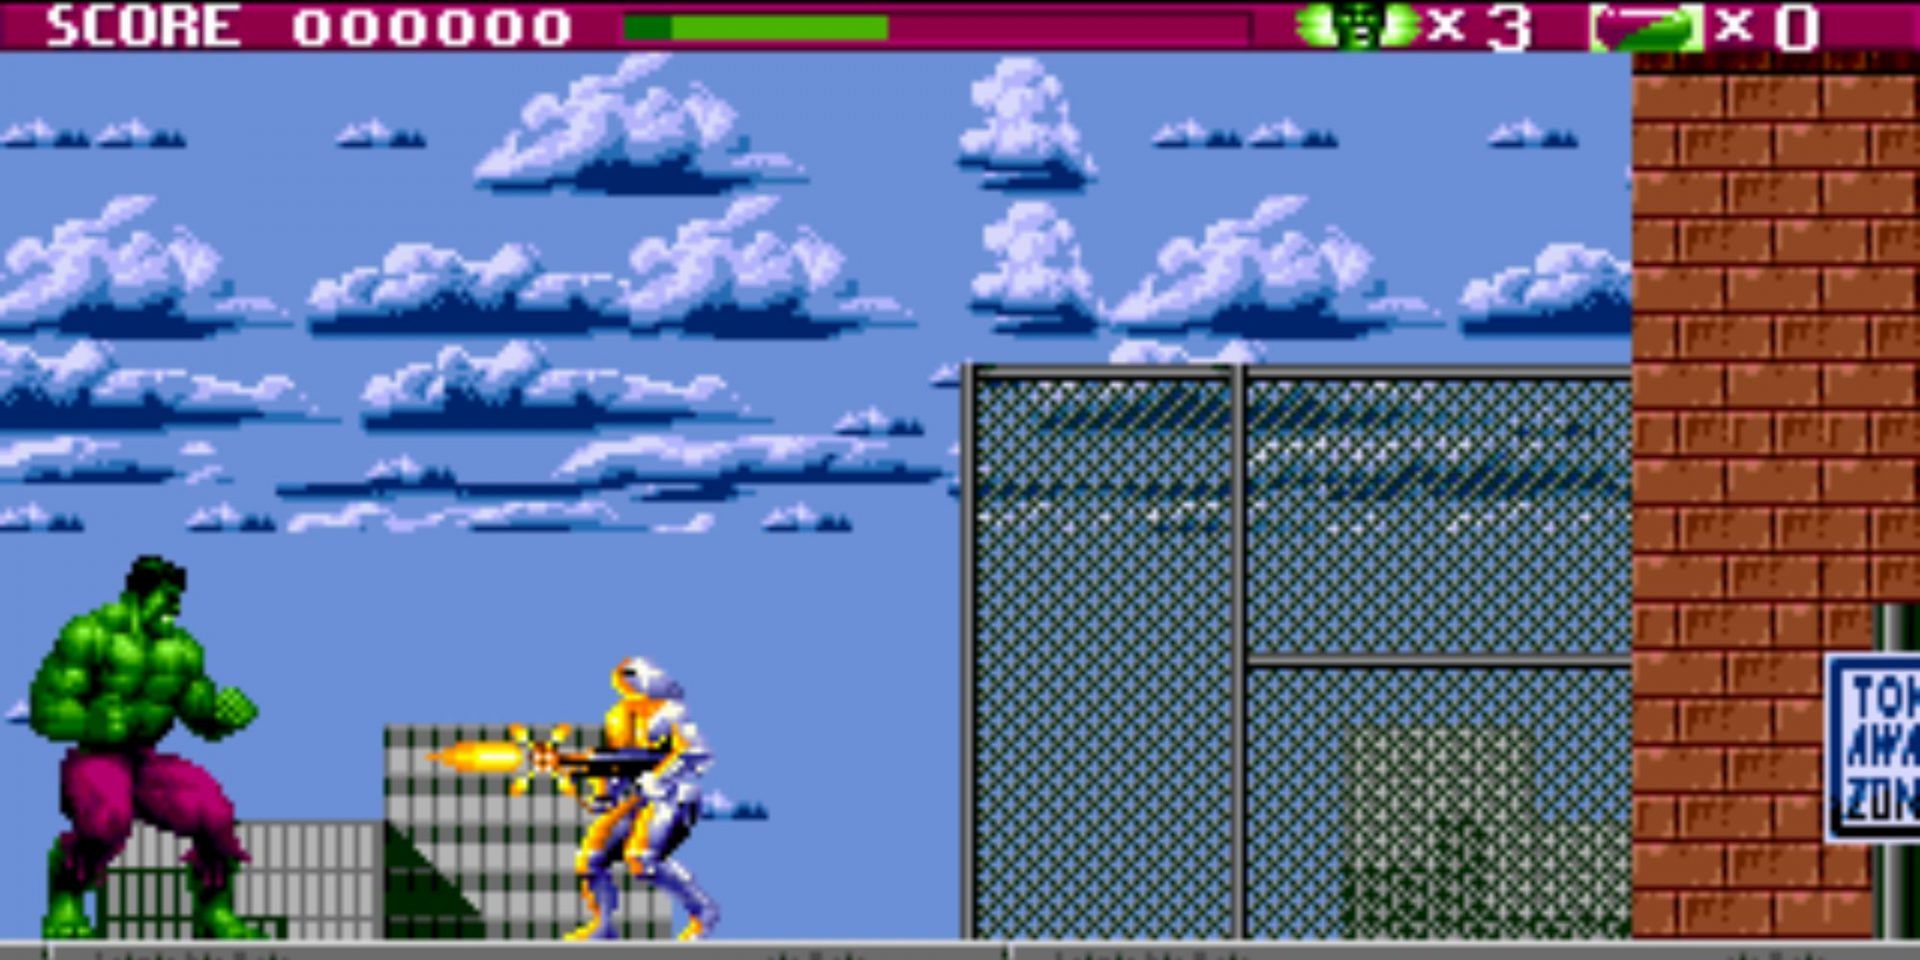 Hulk stares down an enemy soldier at the beginning of a level